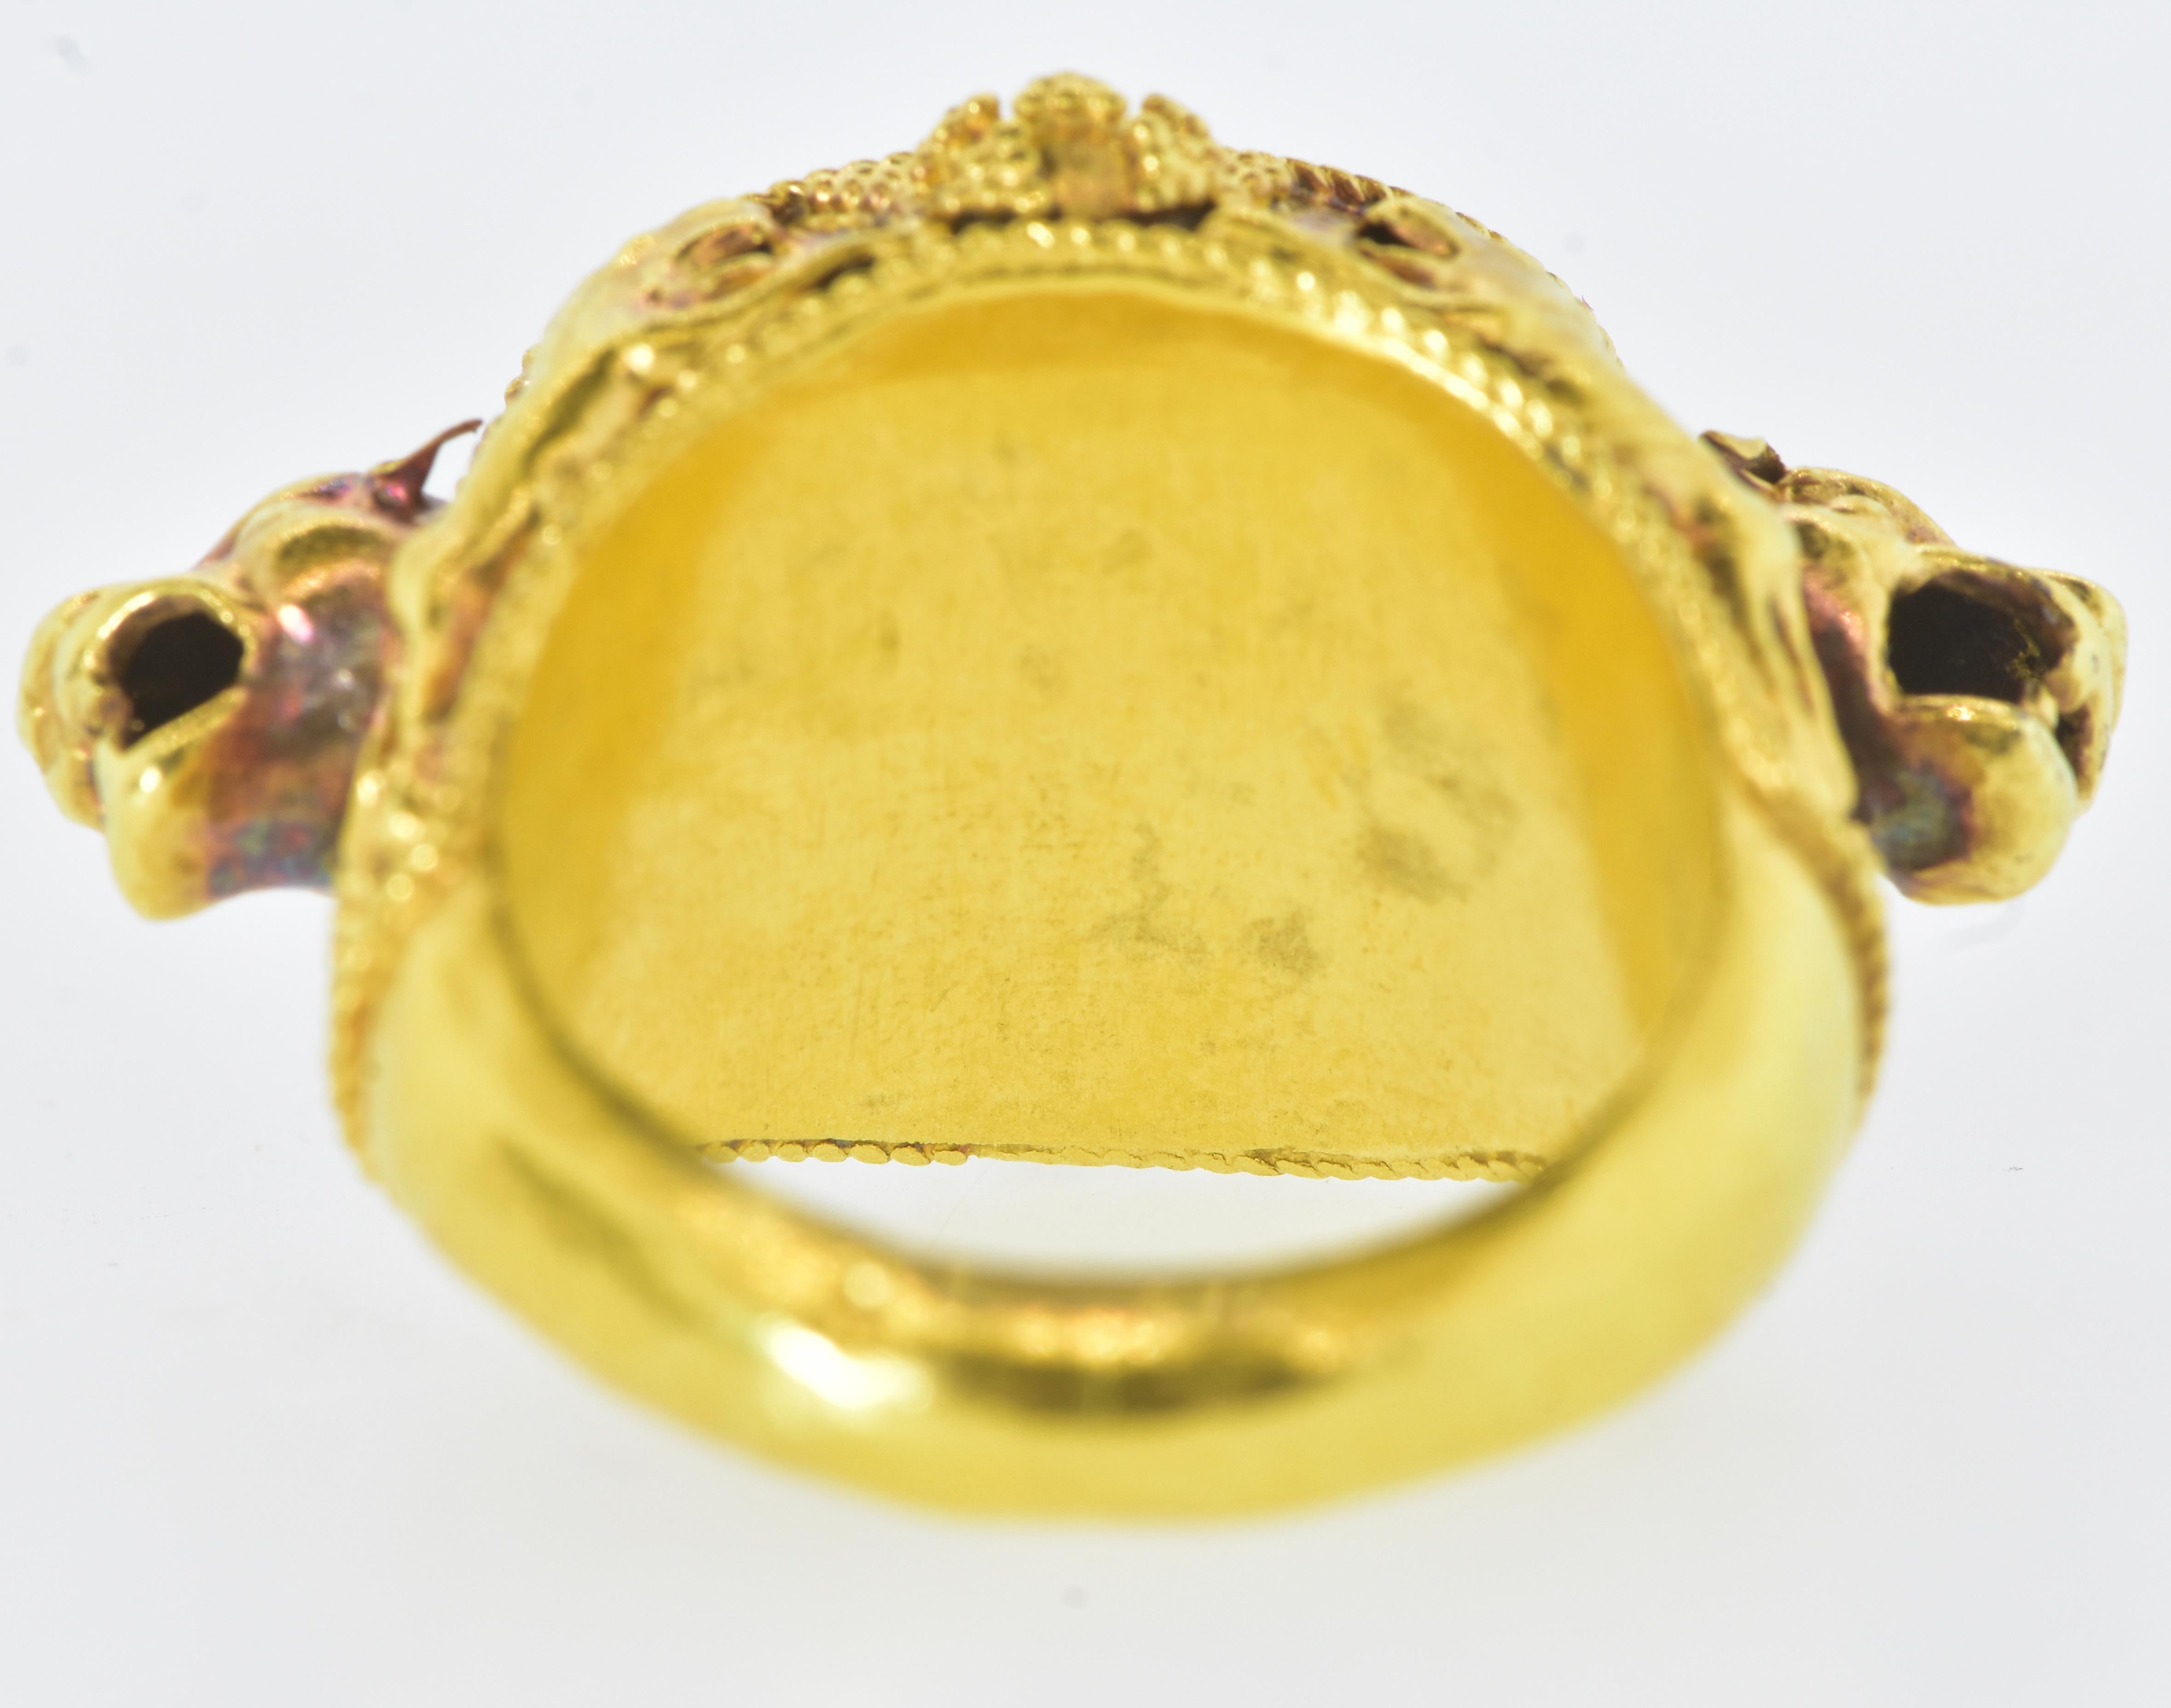 Antique Banded Agate Intaglio Within a Rare 22k Ring, C. 1800 8